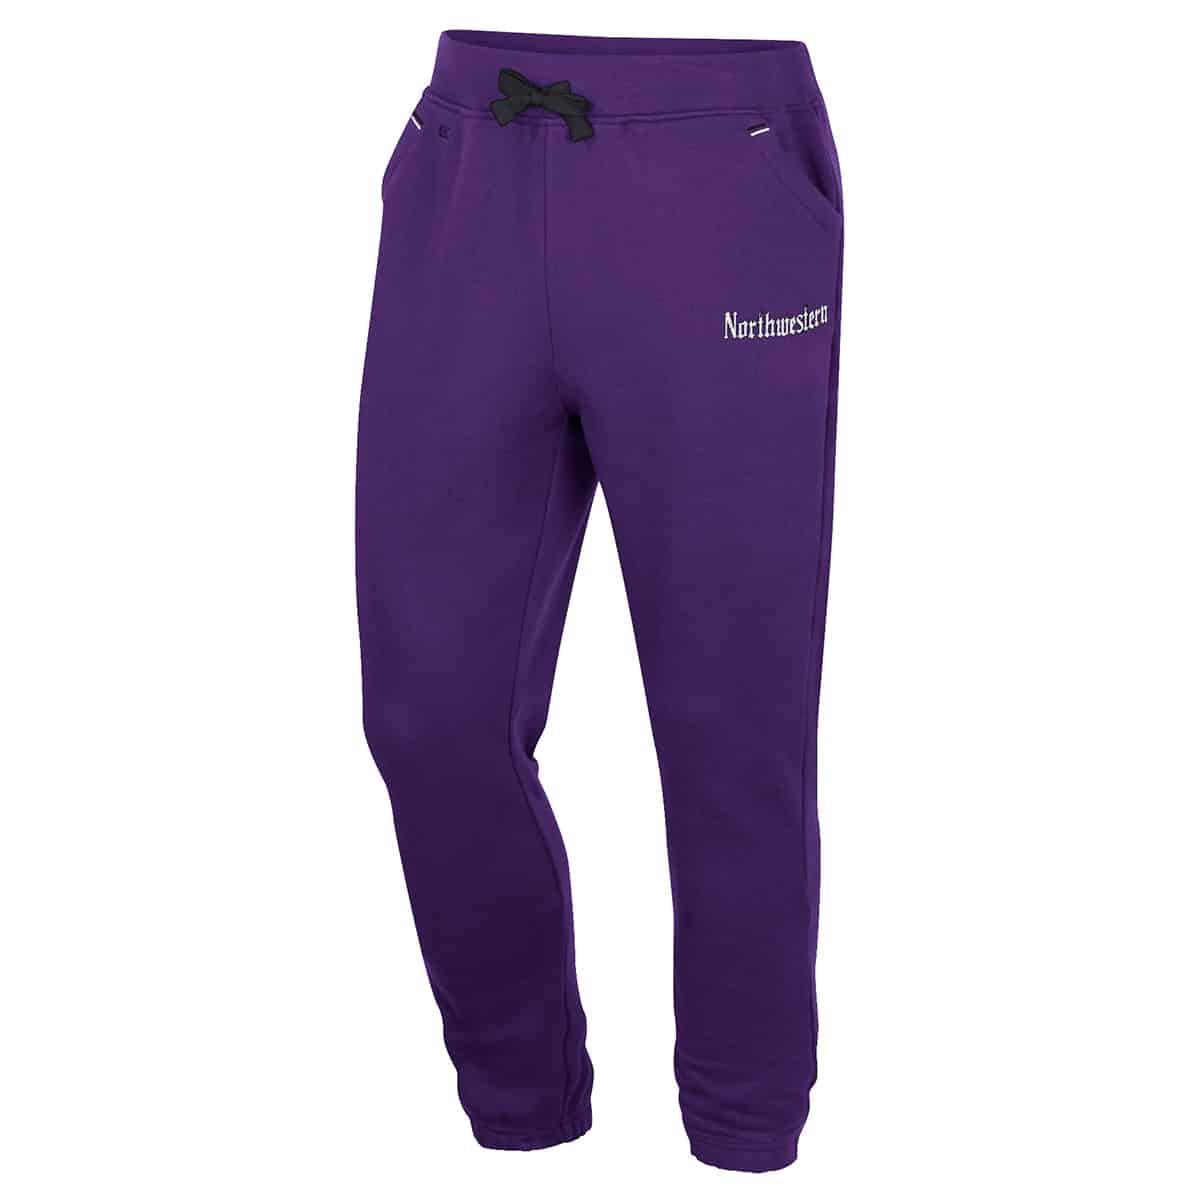 Northwestern Wildcats: Buy Jogger Pants and more